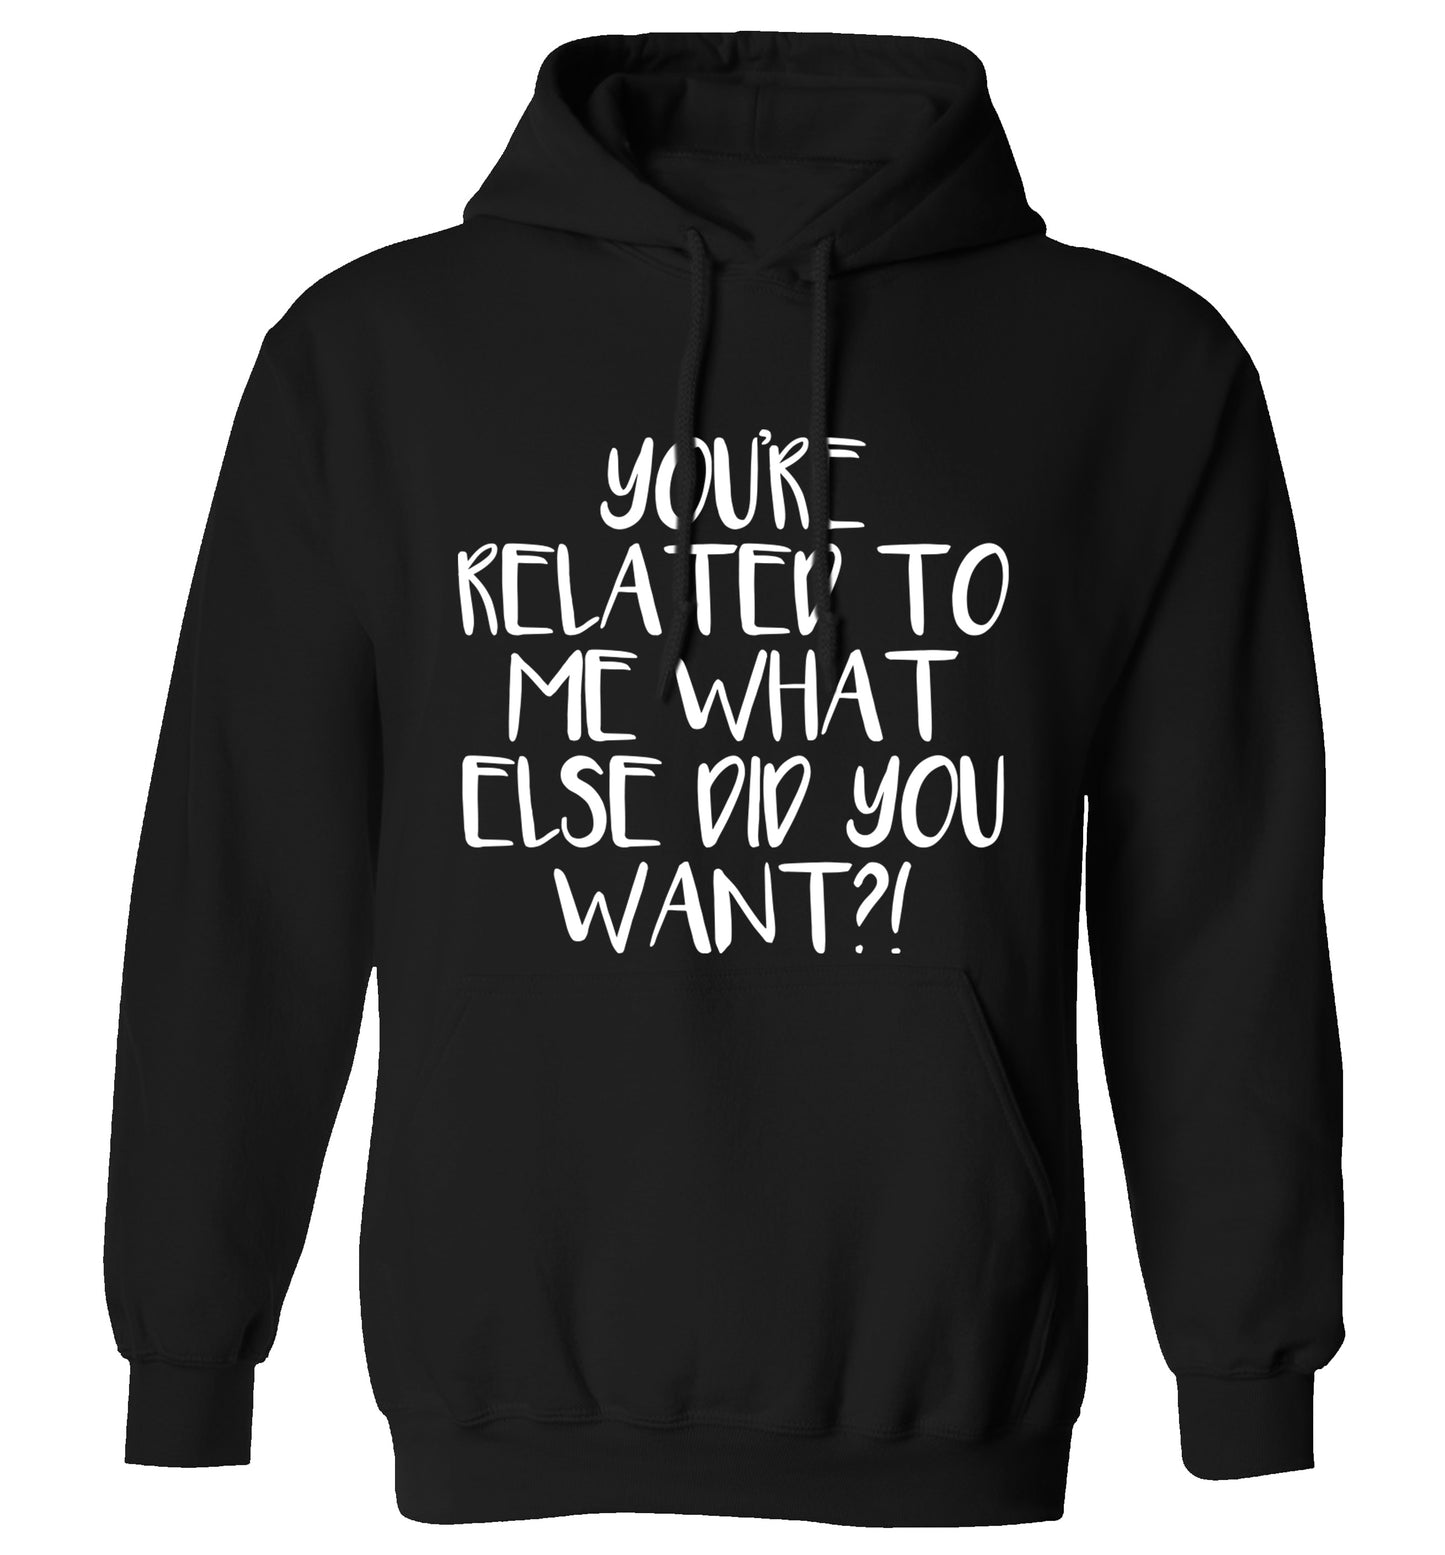 You're related to me what more do you want? adults unisex black hoodie 2XL